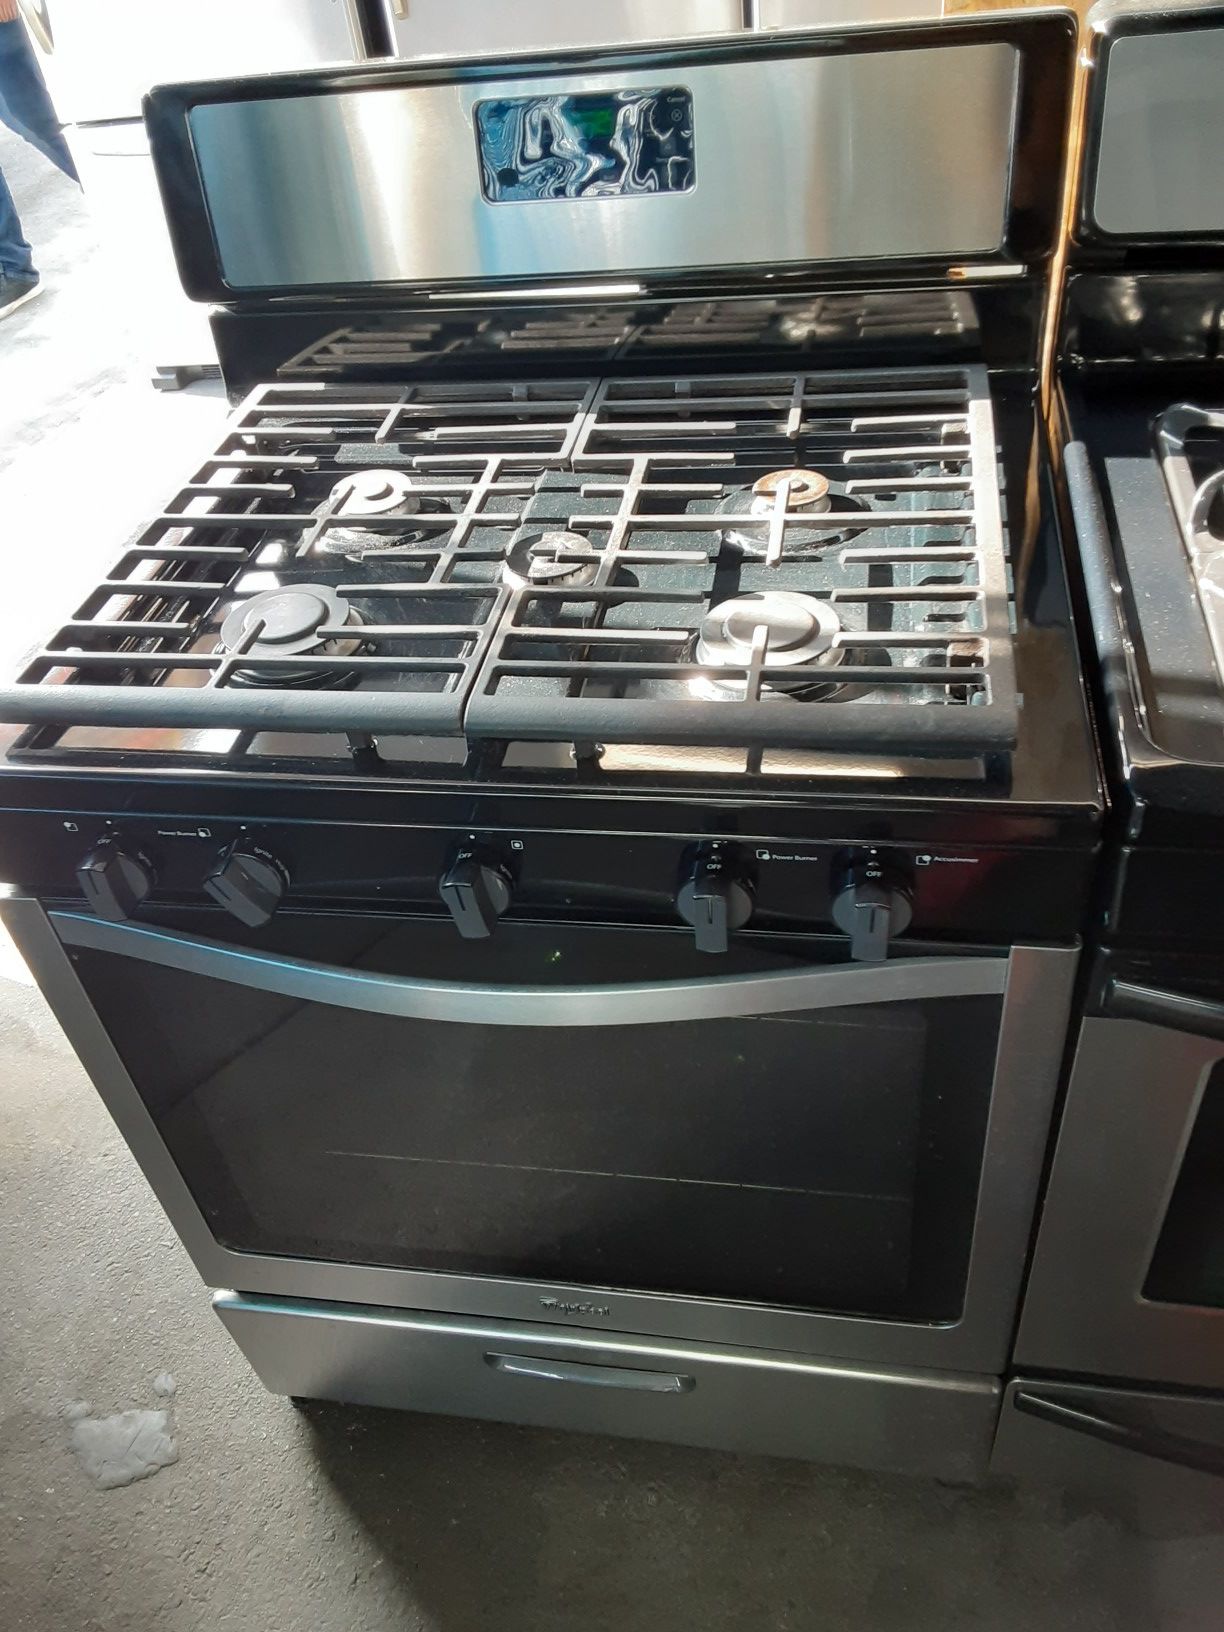 $450 Whirlpool stainless 5 burner gas range includes delivery in the San Fernando Valley a warranty and installation